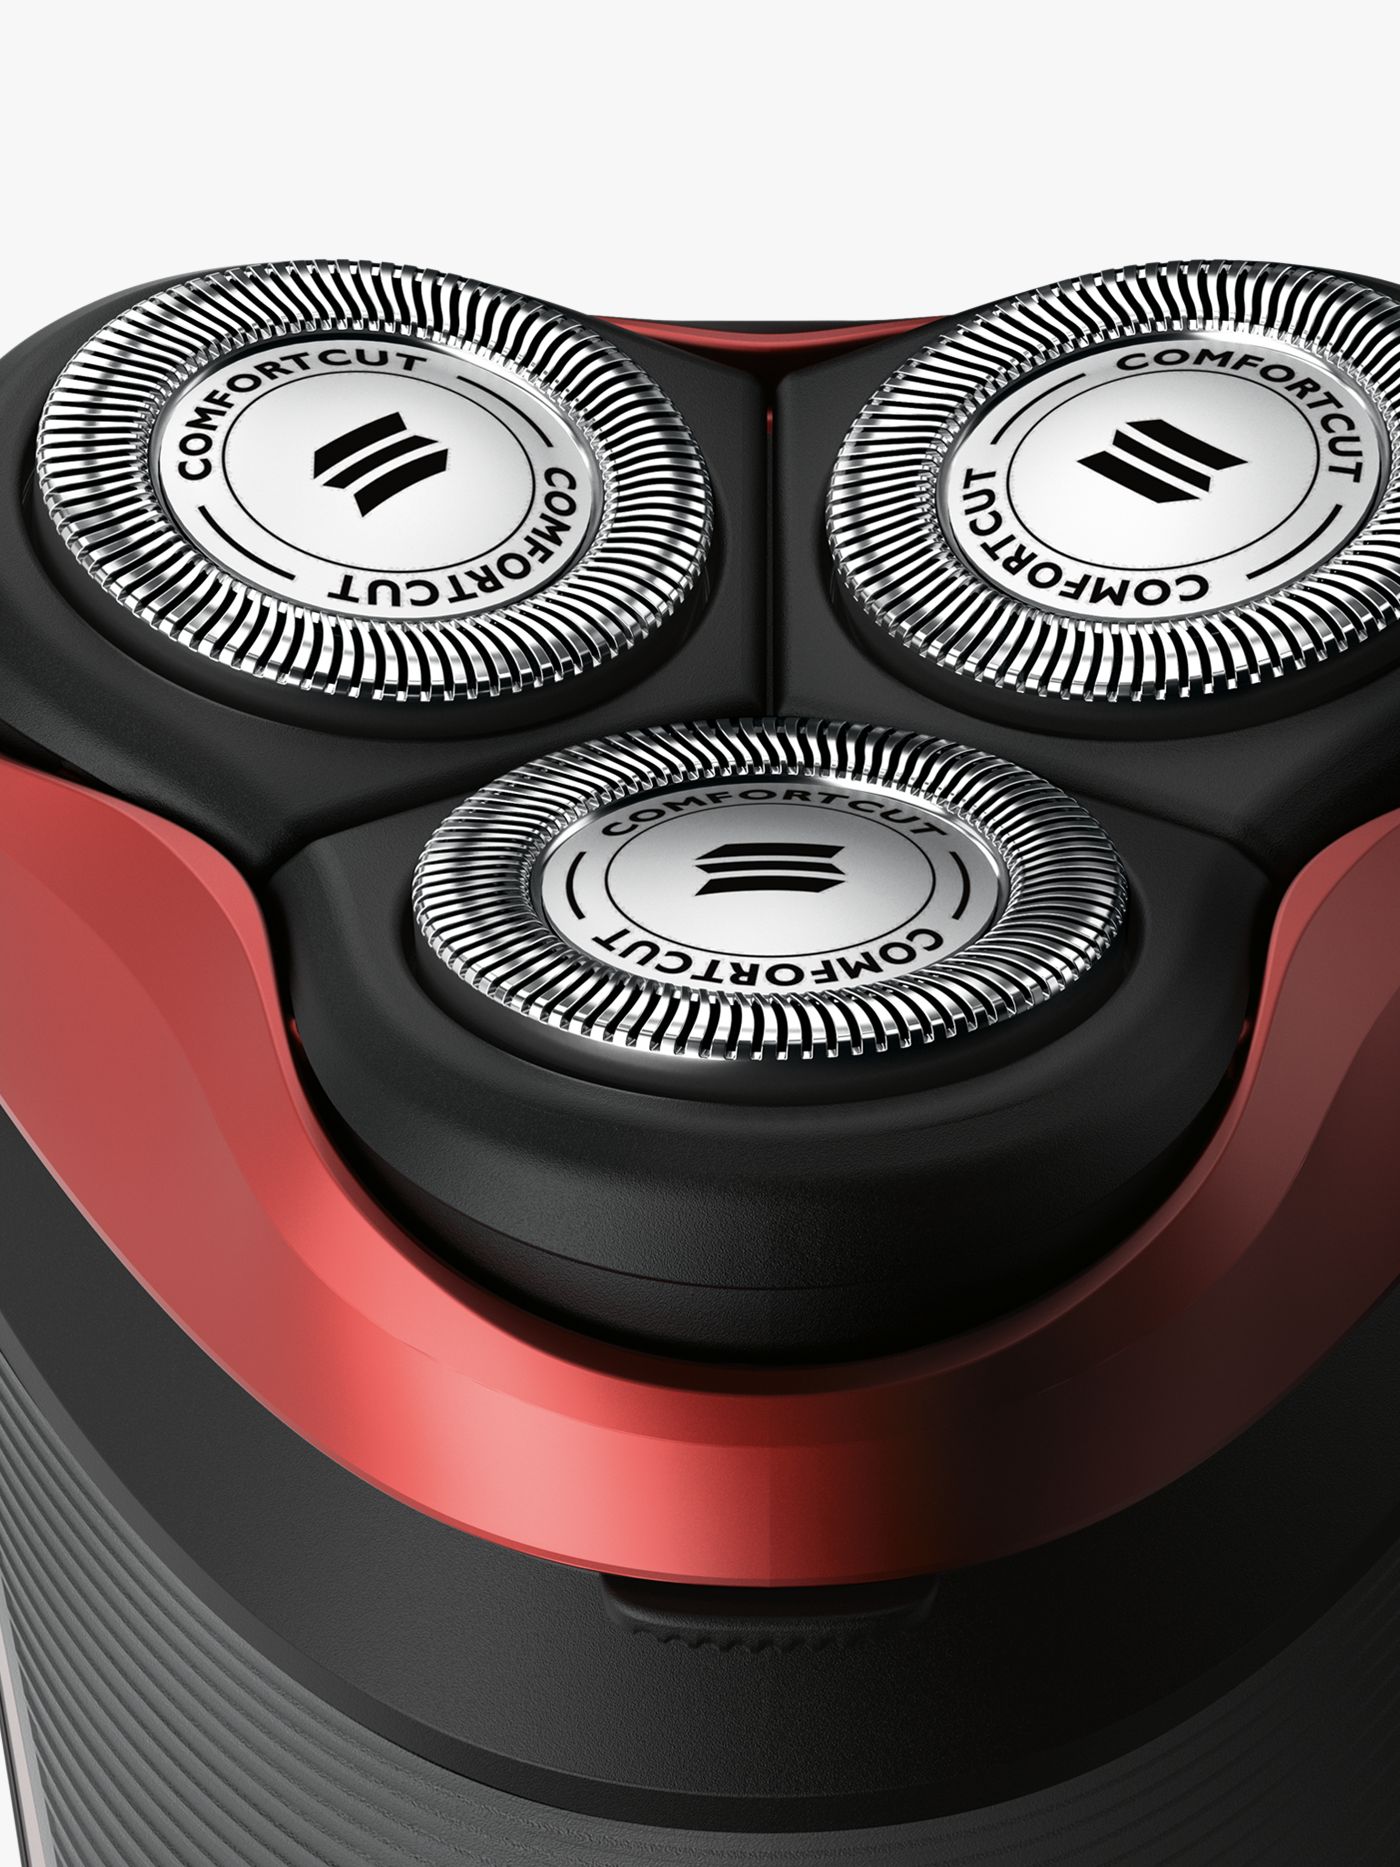 philips s3580 shaver